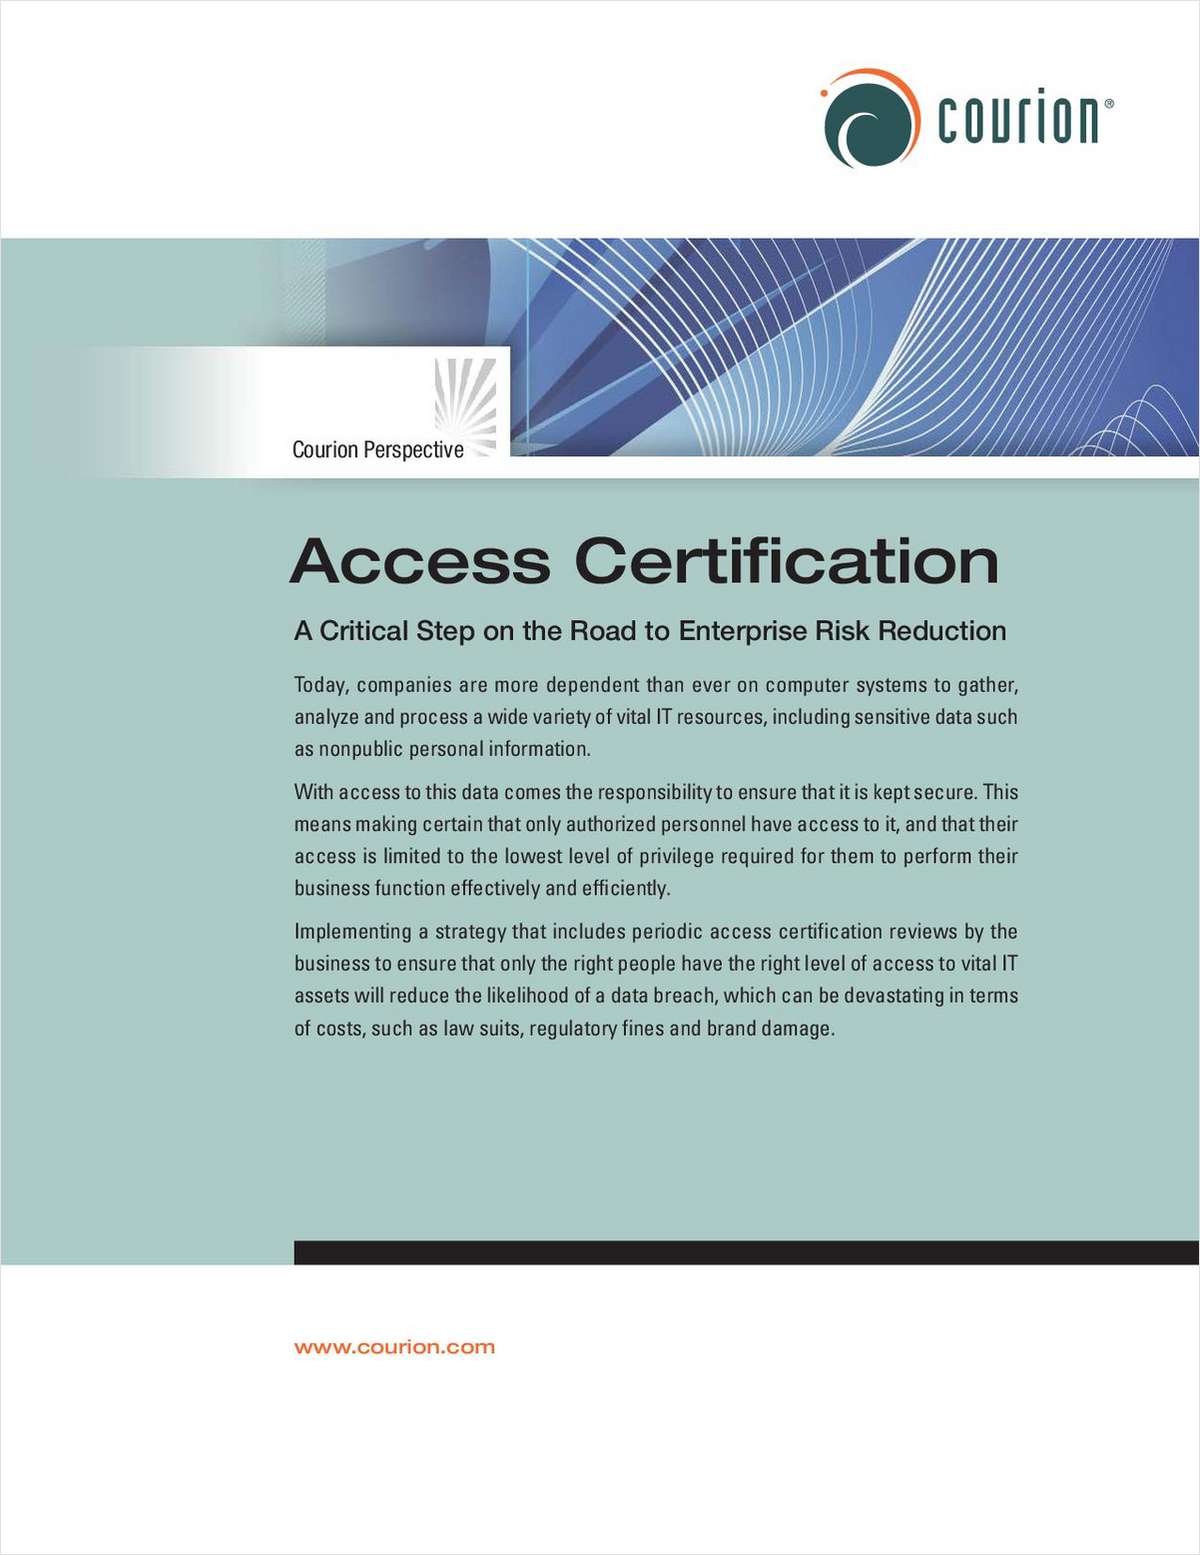 Best Practices for Access Certification